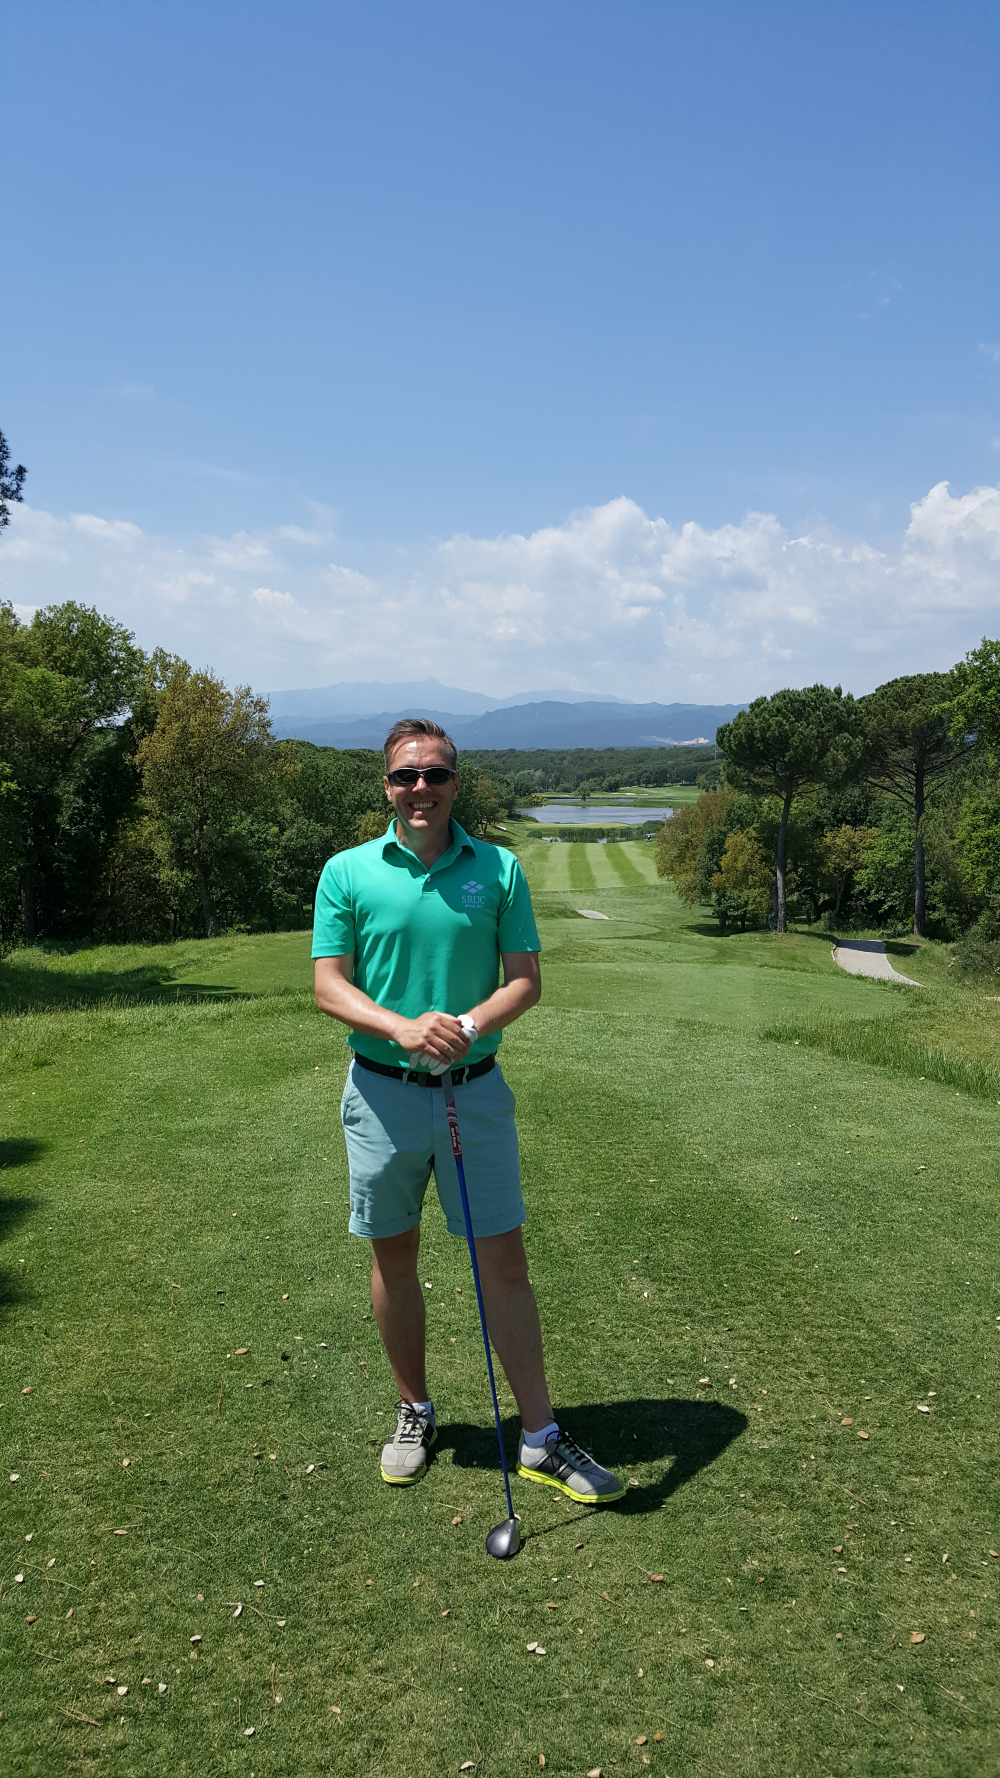 Fraser on a golf course with mountains in the background and a golf club in his hands